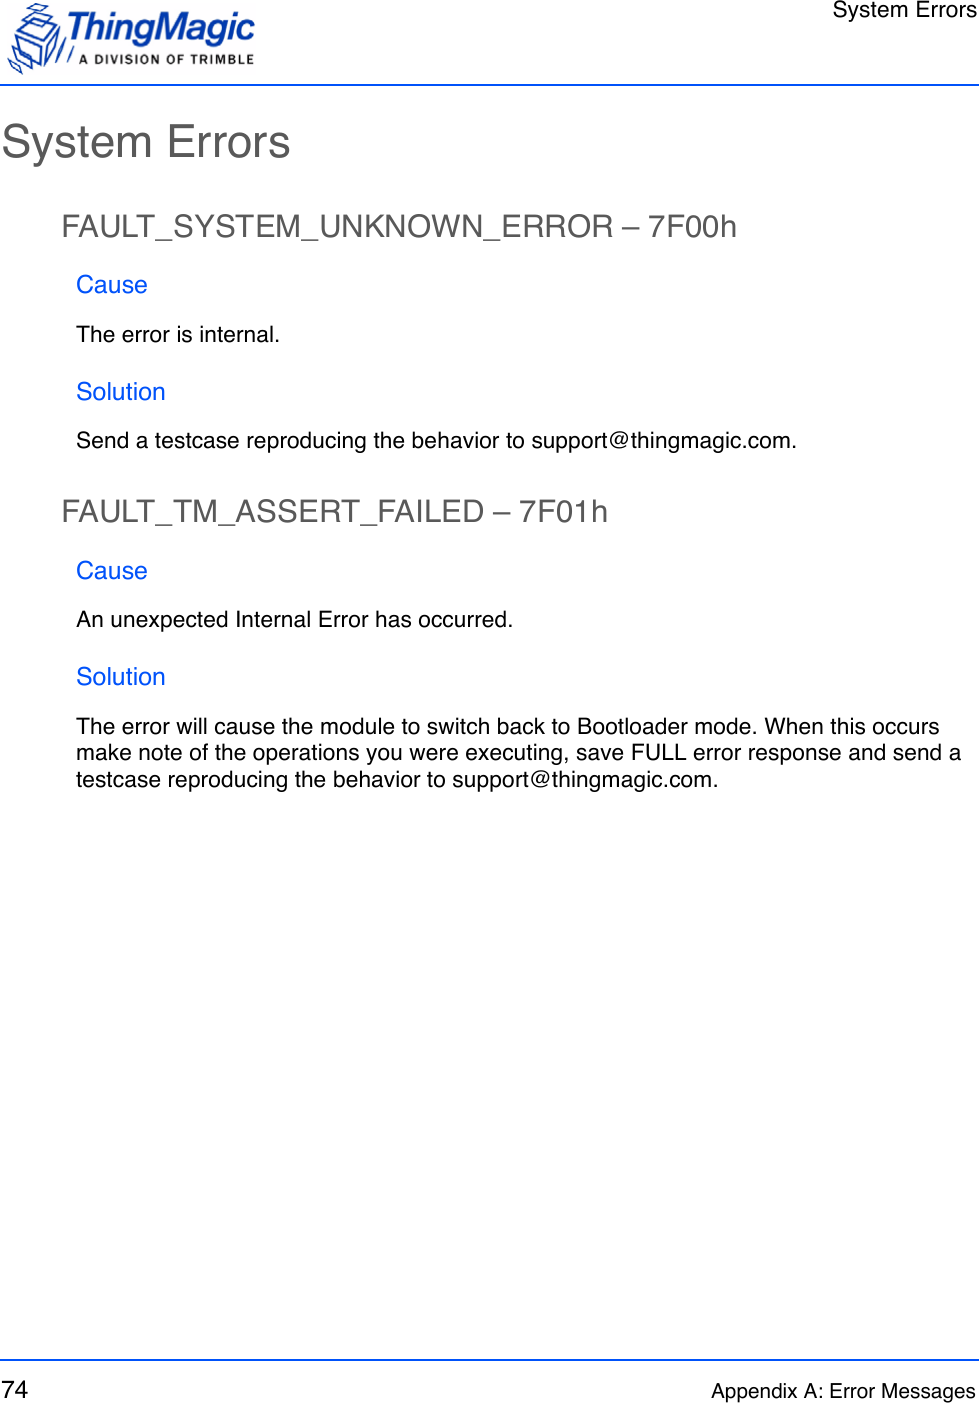 System Errors74 Appendix A: Error MessagesSystem ErrorsFAULT_SYSTEM_UNKNOWN_ERROR – 7F00hCauseThe error is internal.SolutionSend a testcase reproducing the behavior to support@thingmagic.com.FAULT_TM_ASSERT_FAILED – 7F01hCauseAn unexpected Internal Error has occurred.SolutionThe error will cause the module to switch back to Bootloader mode. When this occurs make note of the operations you were executing, save FULL error response and send a testcase reproducing the behavior to support@thingmagic.com.